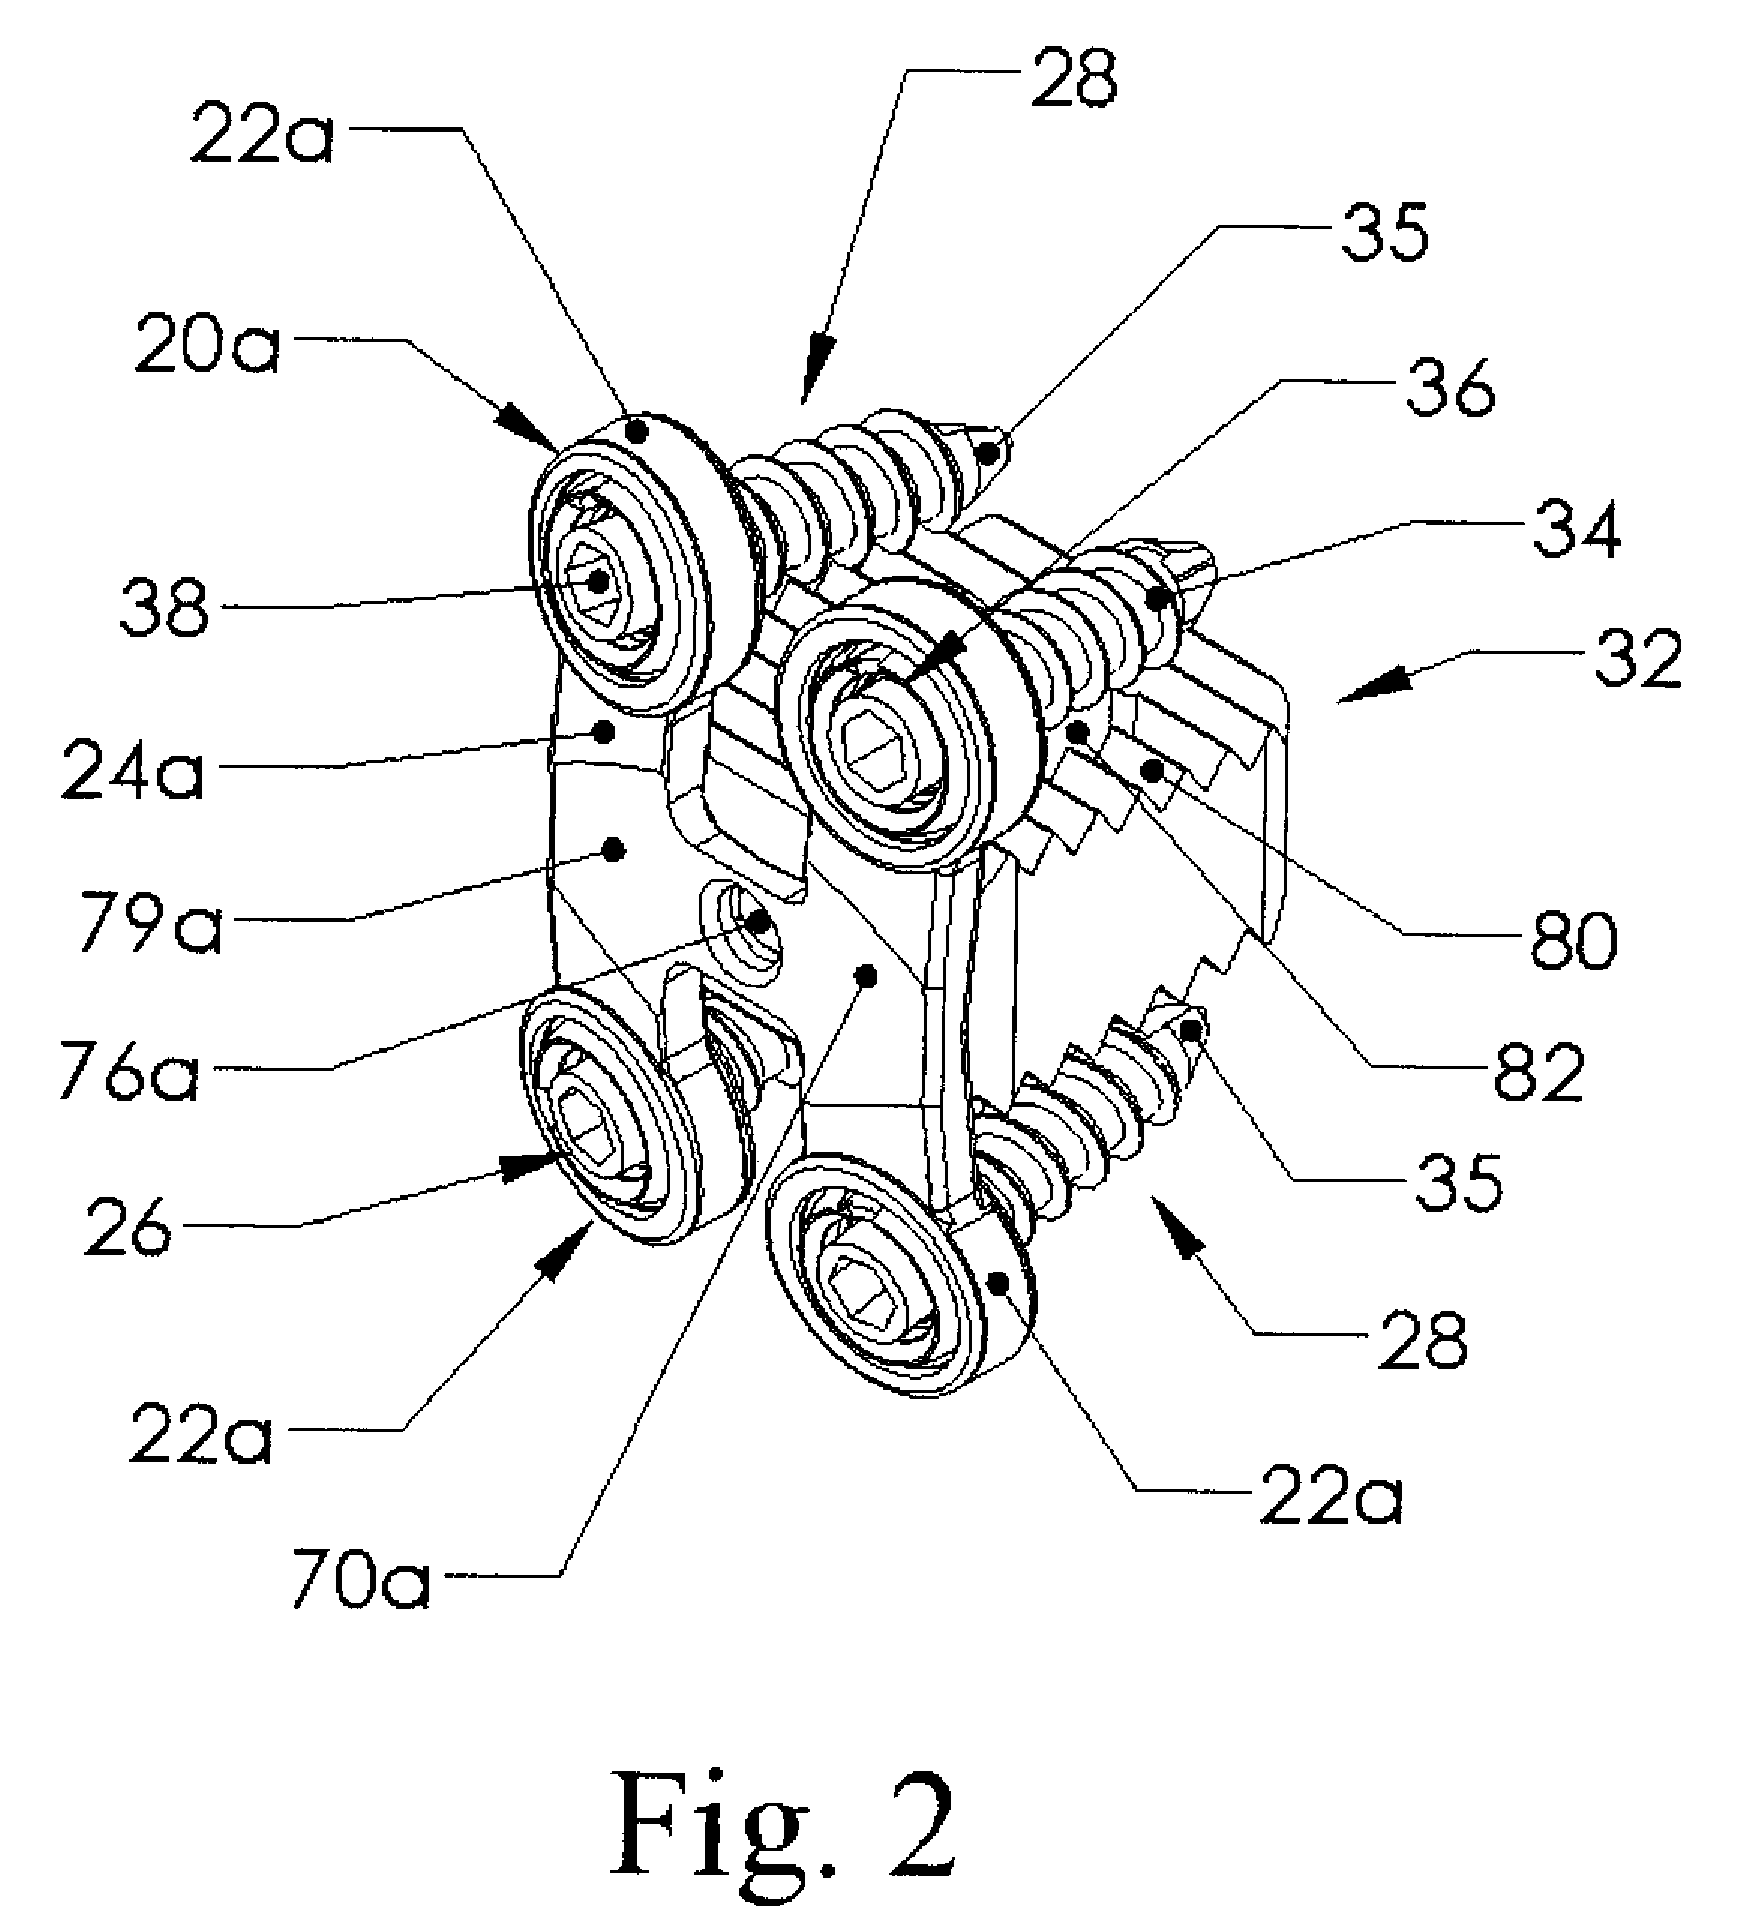 Spinal fixation device